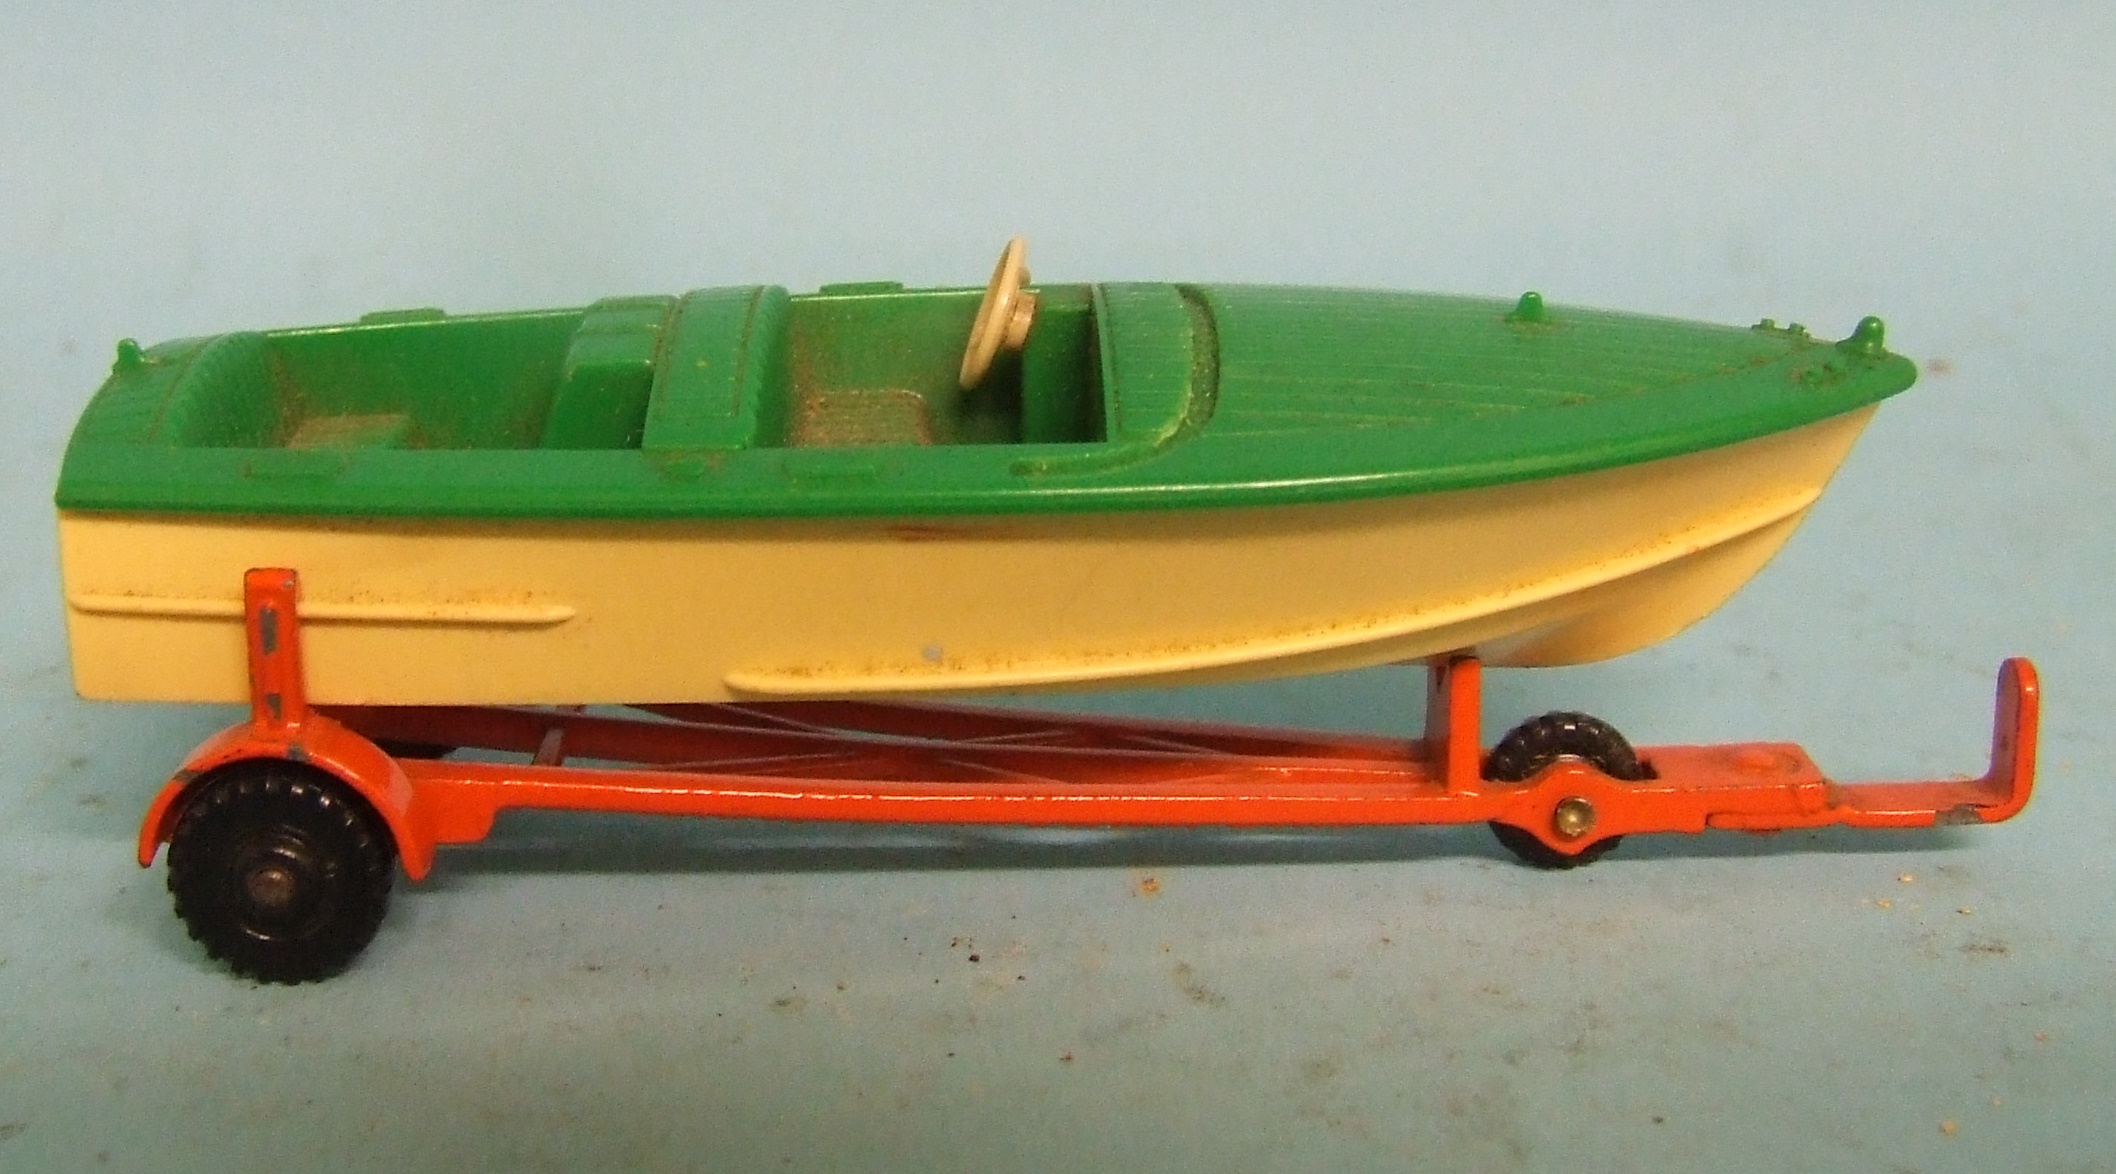 Assorted Corgi, Dinky and other die-cast toys, including a Dinky Toys Healey Sports Boat, and